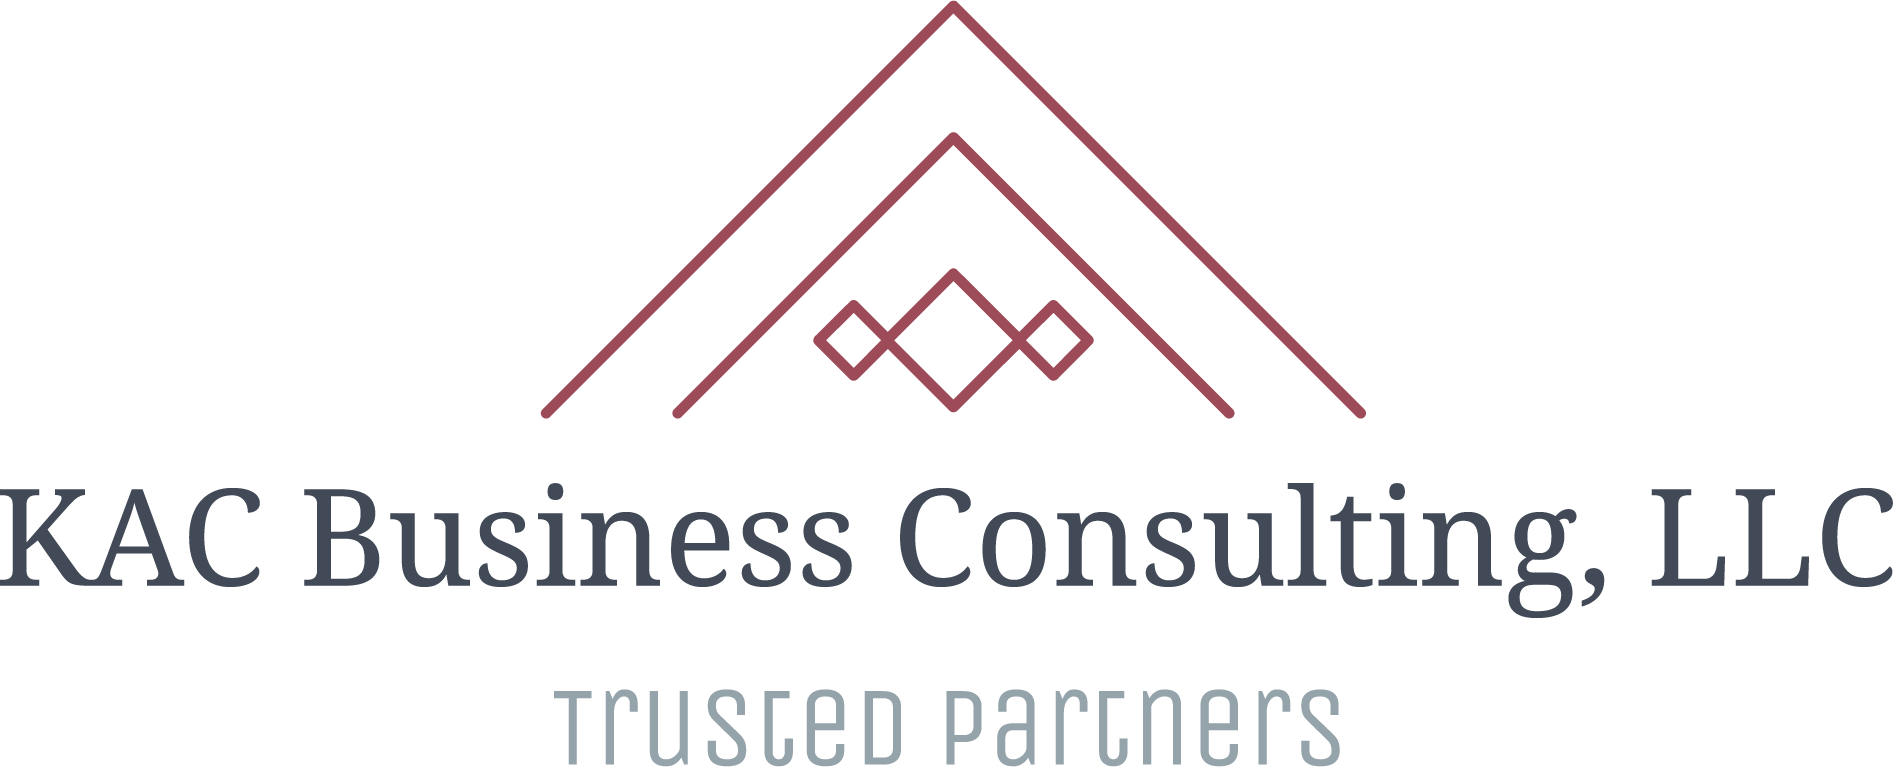 KAC Business Consulting